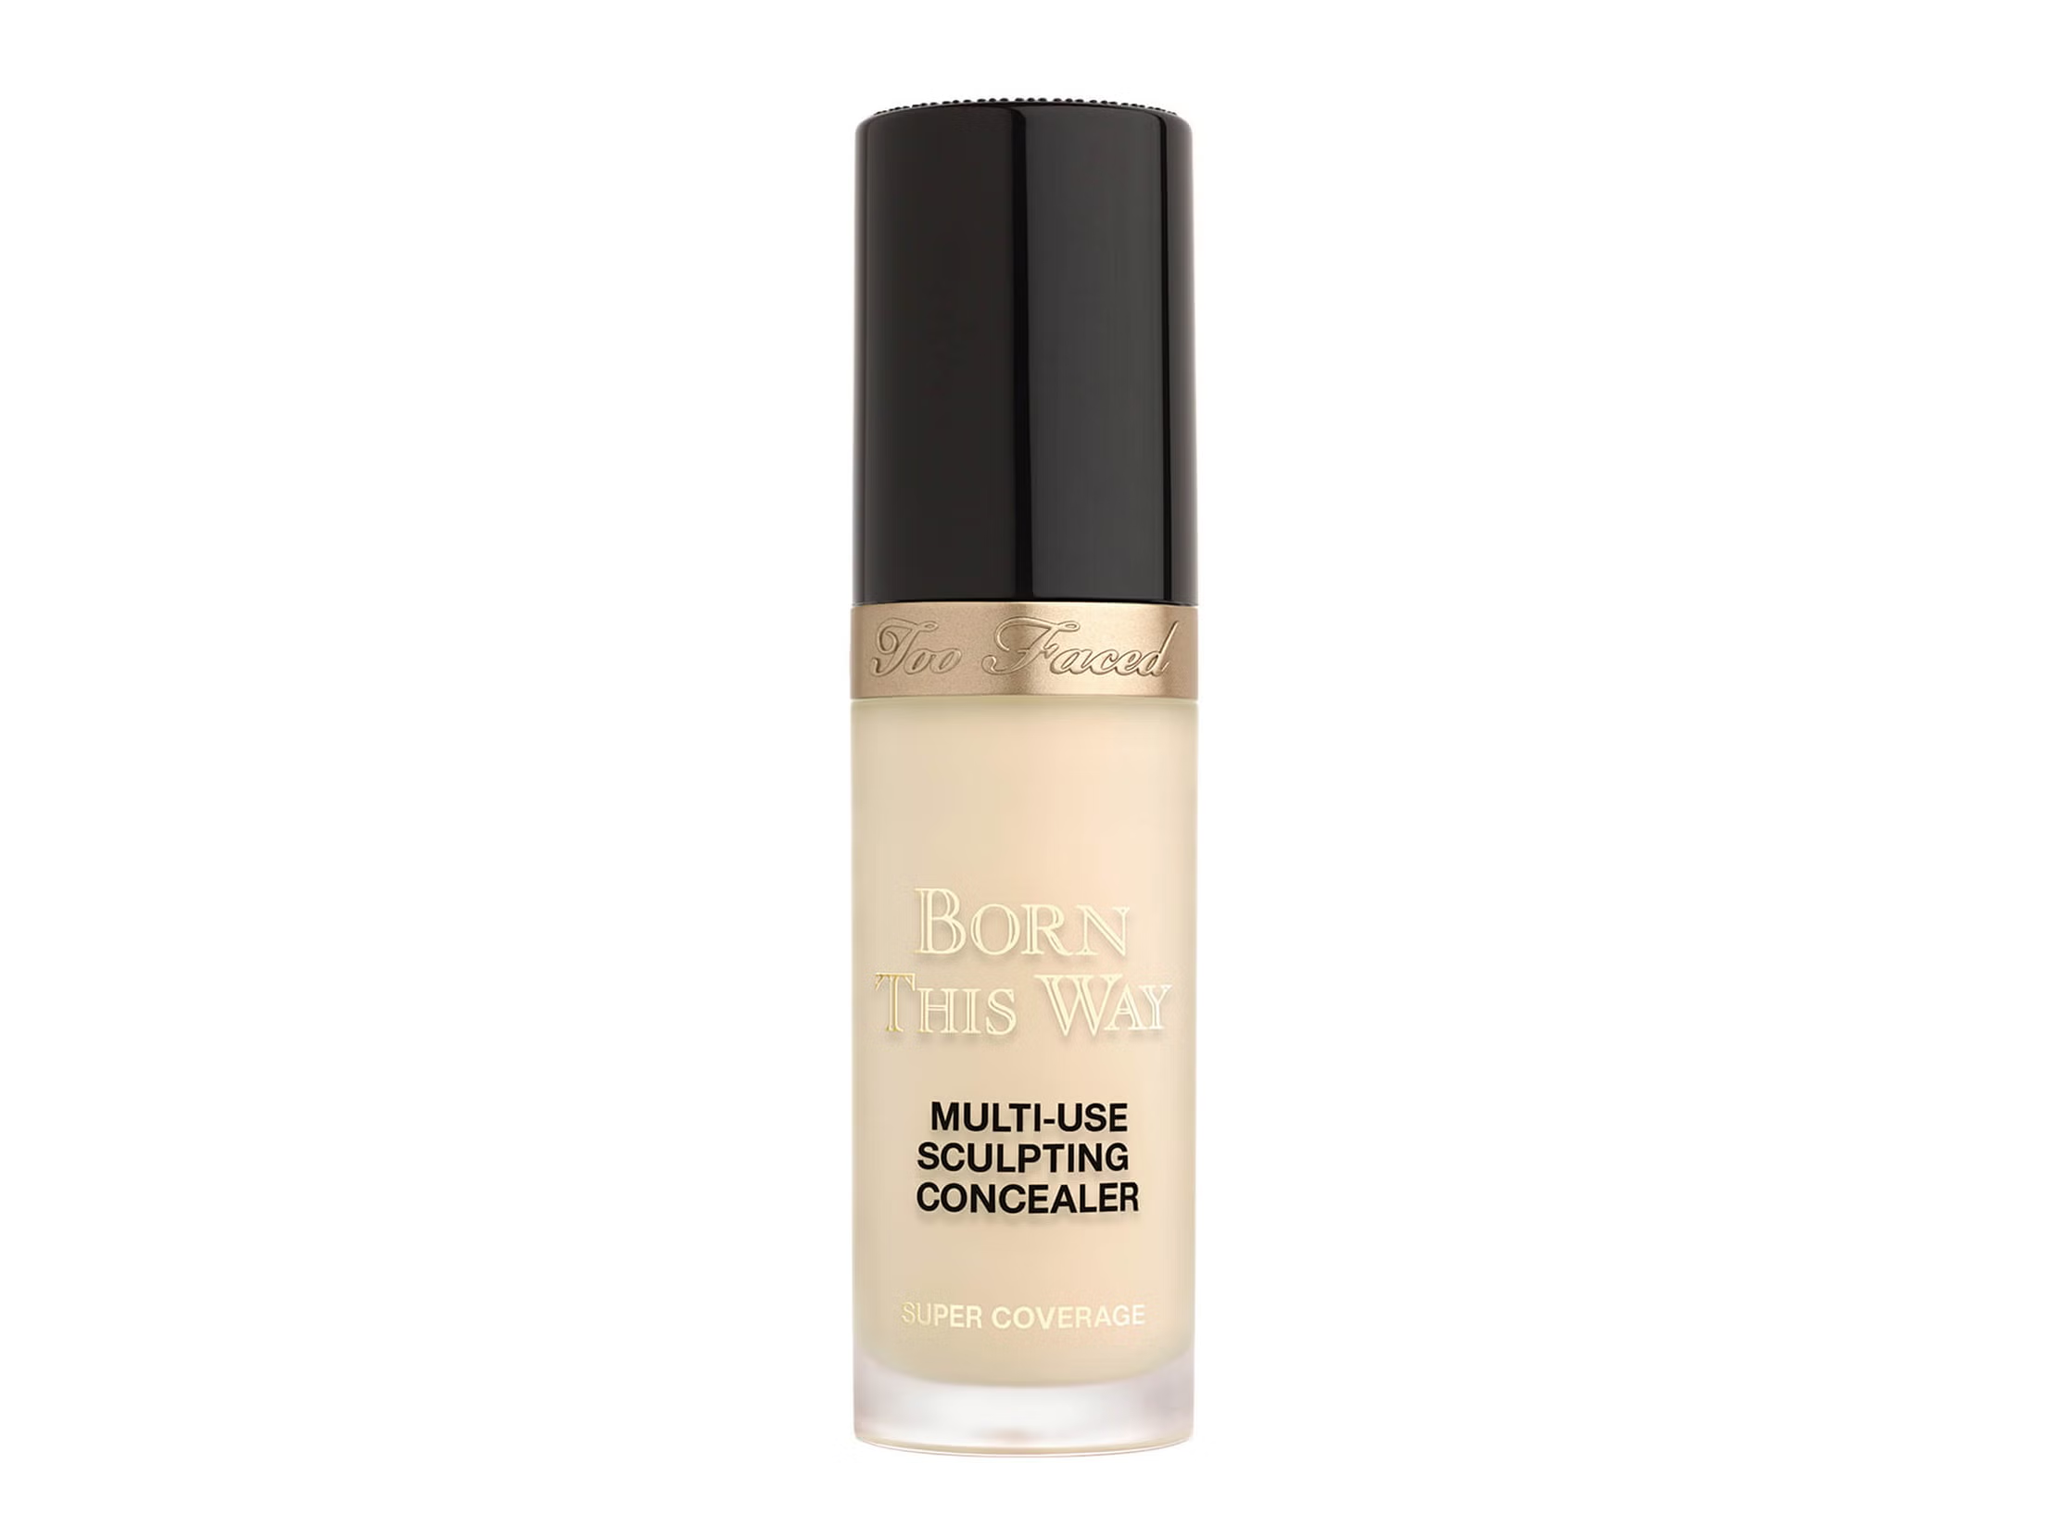 Too Faced born this way multi-use sculpting concealer